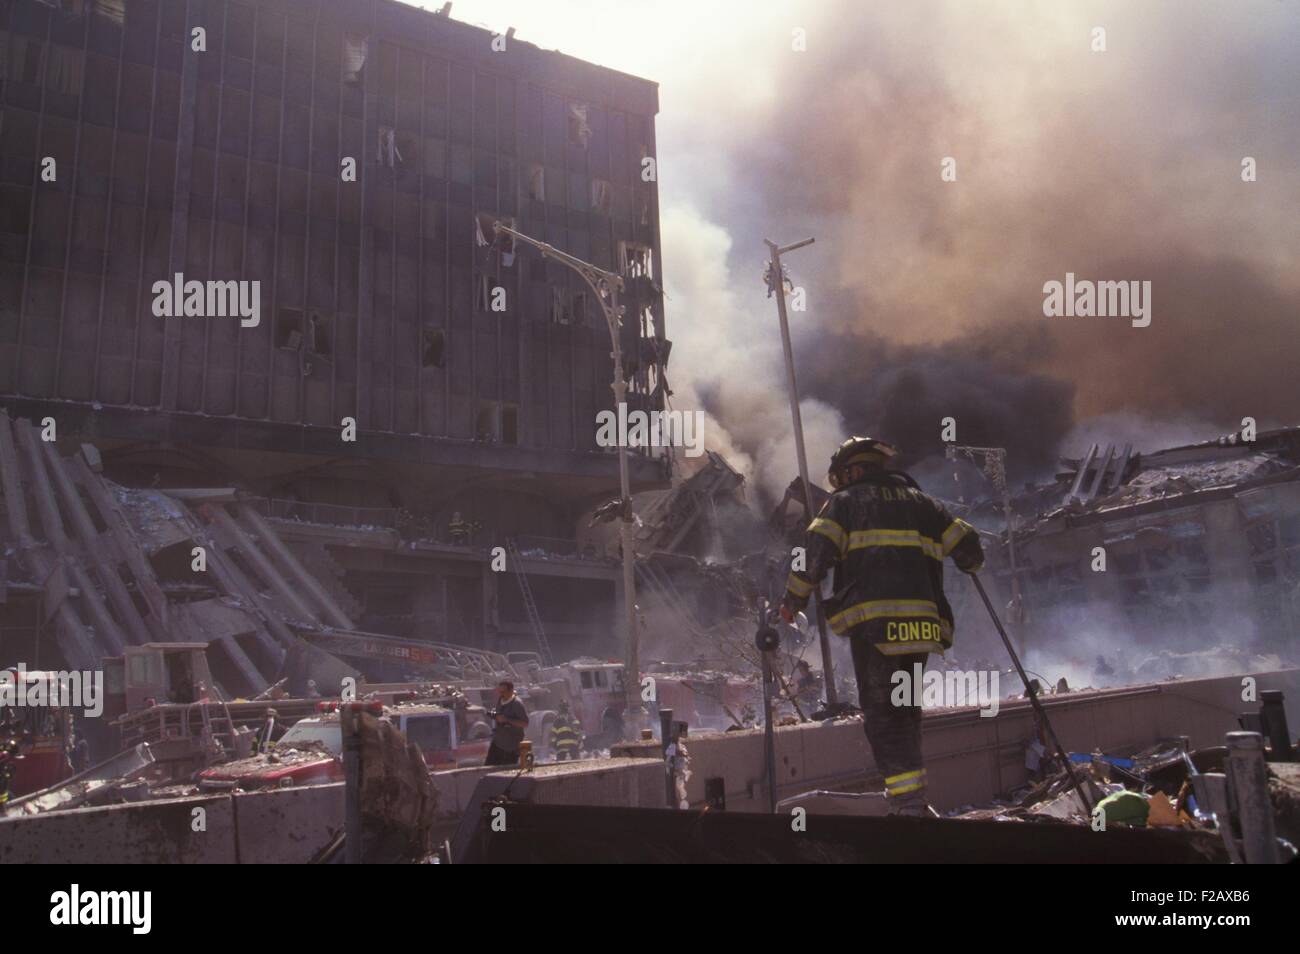 Fire fighters amid smoking rubble following September 11th terrorist attack on World Trade Center. Photo shows the still standing WTC 6 and the destroyed North pedestrian bridge over West Side Highway (West St.). In photo upper right is the smoke from the burning pile of the collapsed WTC 1 (North Tower). New York City, Sept. 11, 2001. (BSLOC 2015 2 46) Stock Photo